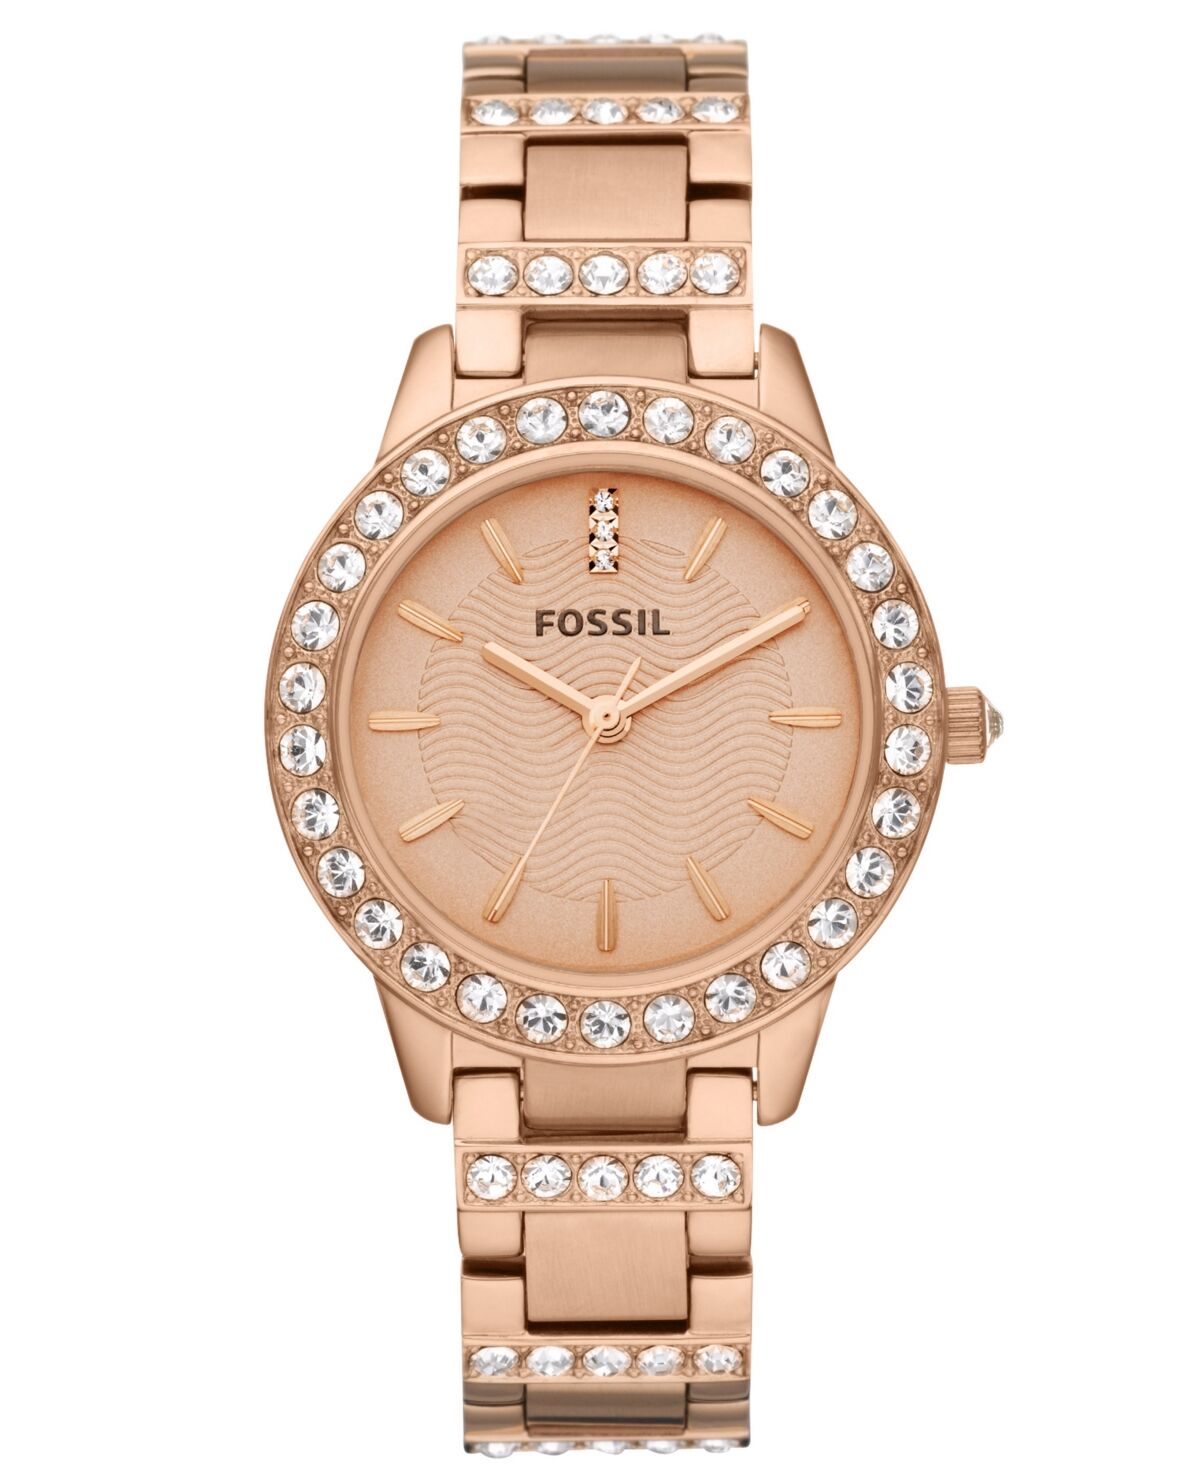 Fossil Women's Jesse Rose Gold-Tone Stainless Steel Bracelet Watch 34mm ES3020 - Rose Gold